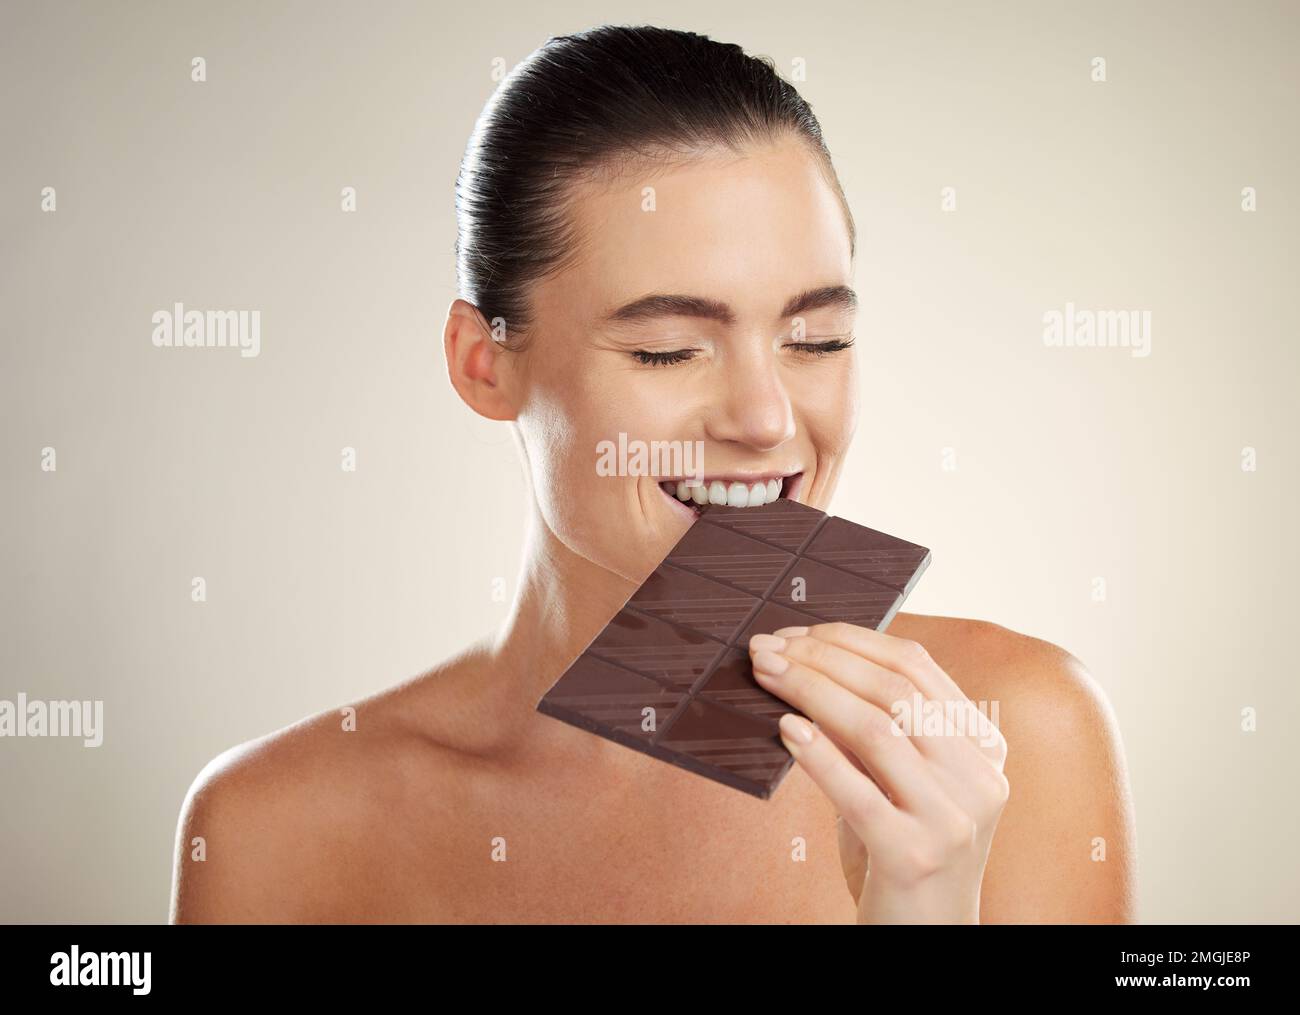 Beauty, eating and face of woman with chocolate bar, junk food or dessert for sugar sweets, candy snack or cheat meal. Cosmetics makeup, skincare and Stock Photo